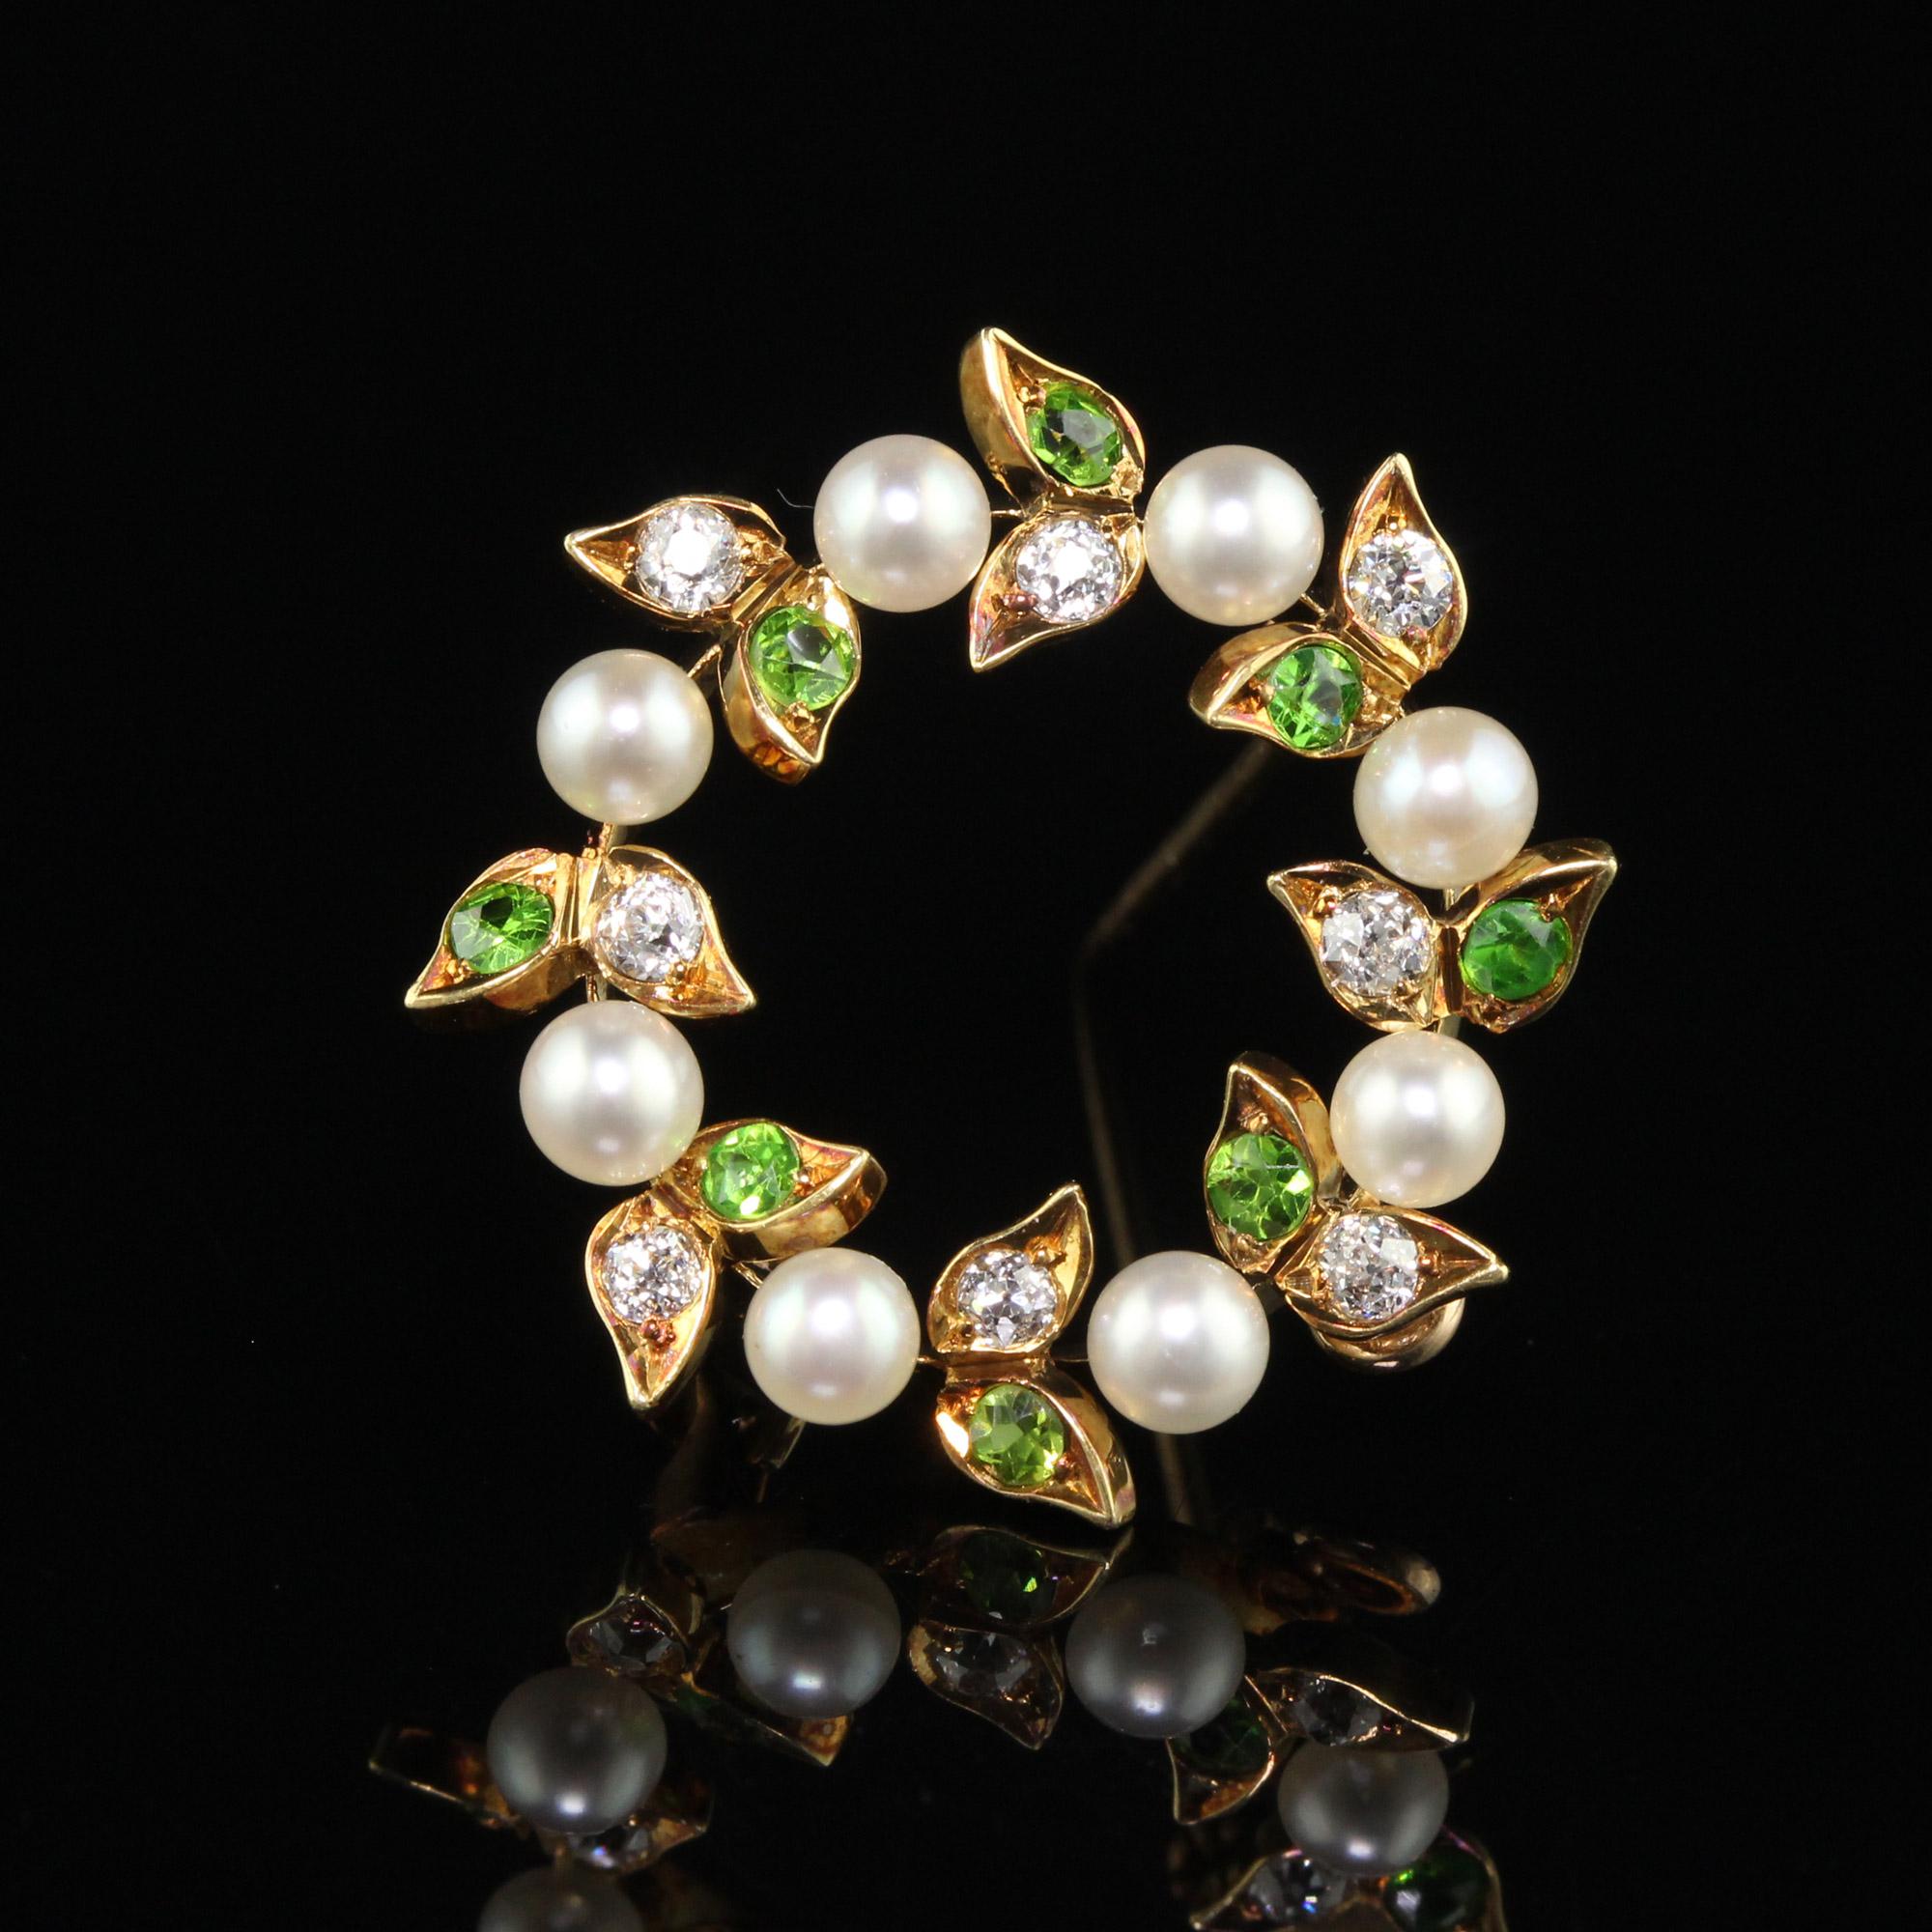 Antique Art Nouveau 18K Yellow Gold Demantoid Garnet Diamond and Pearl Pin Penda In Good Condition For Sale In Great Neck, NY